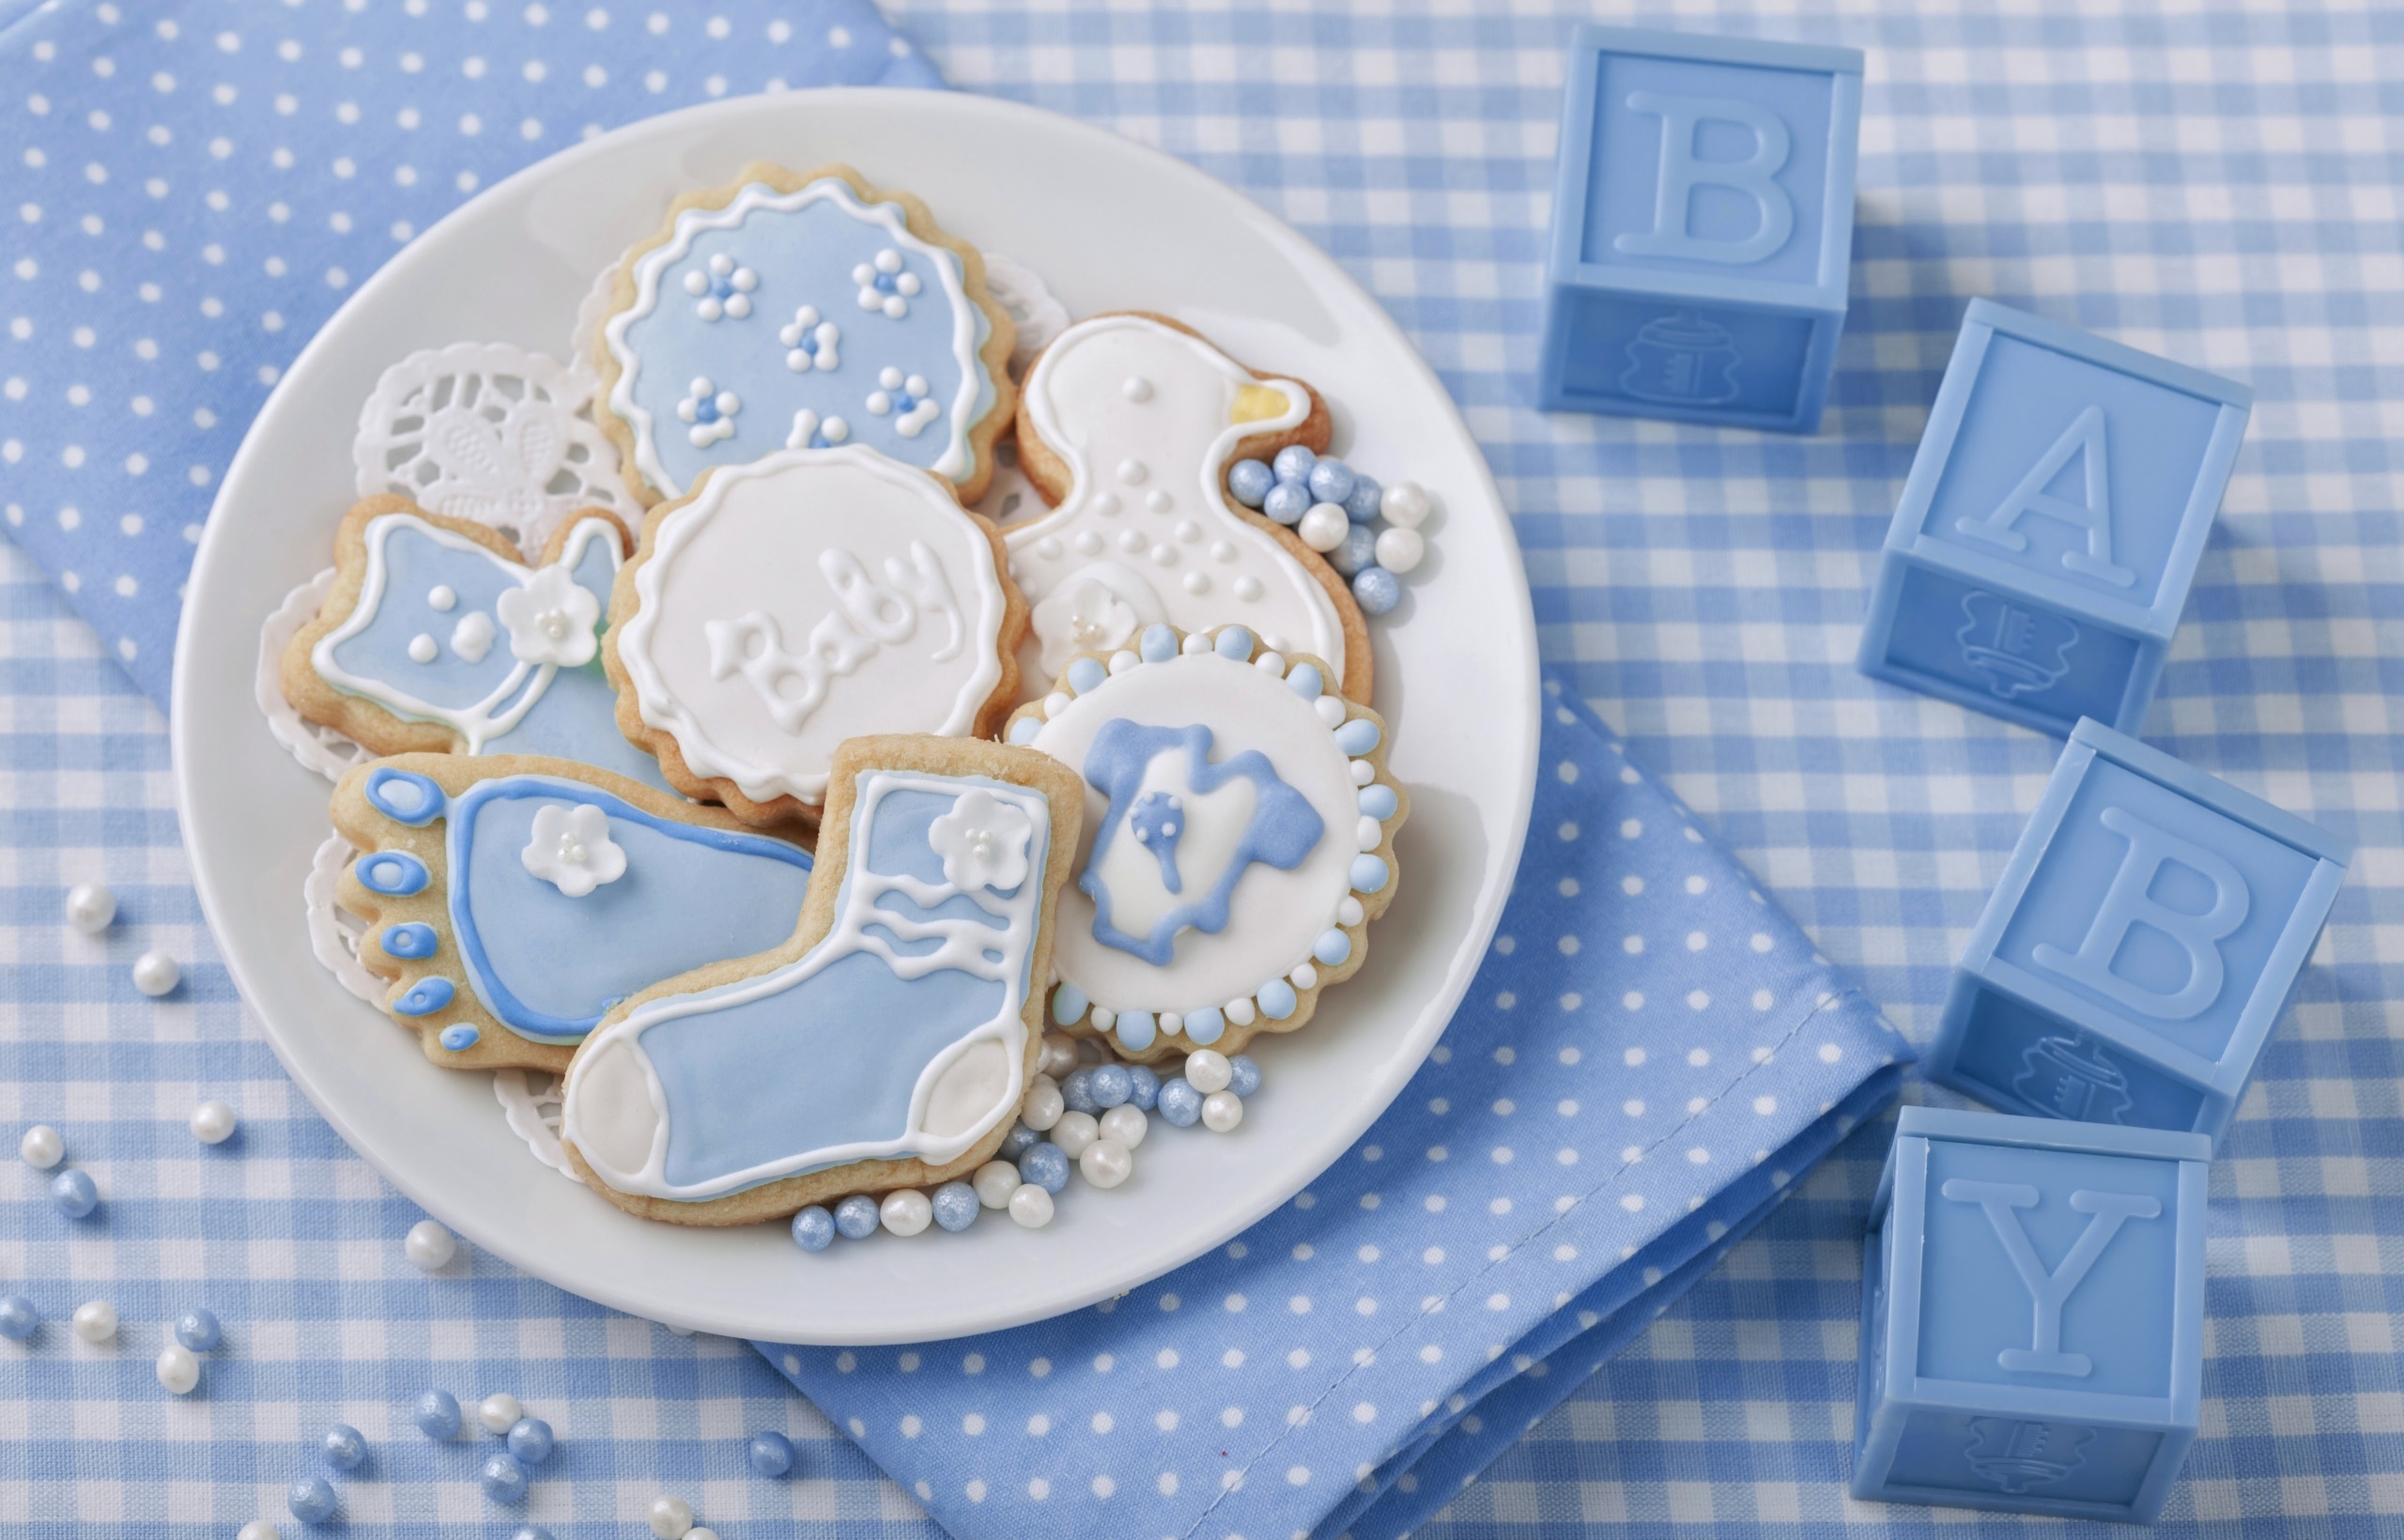 General 2560x1640 cookies blue food sweets cube plates closeup